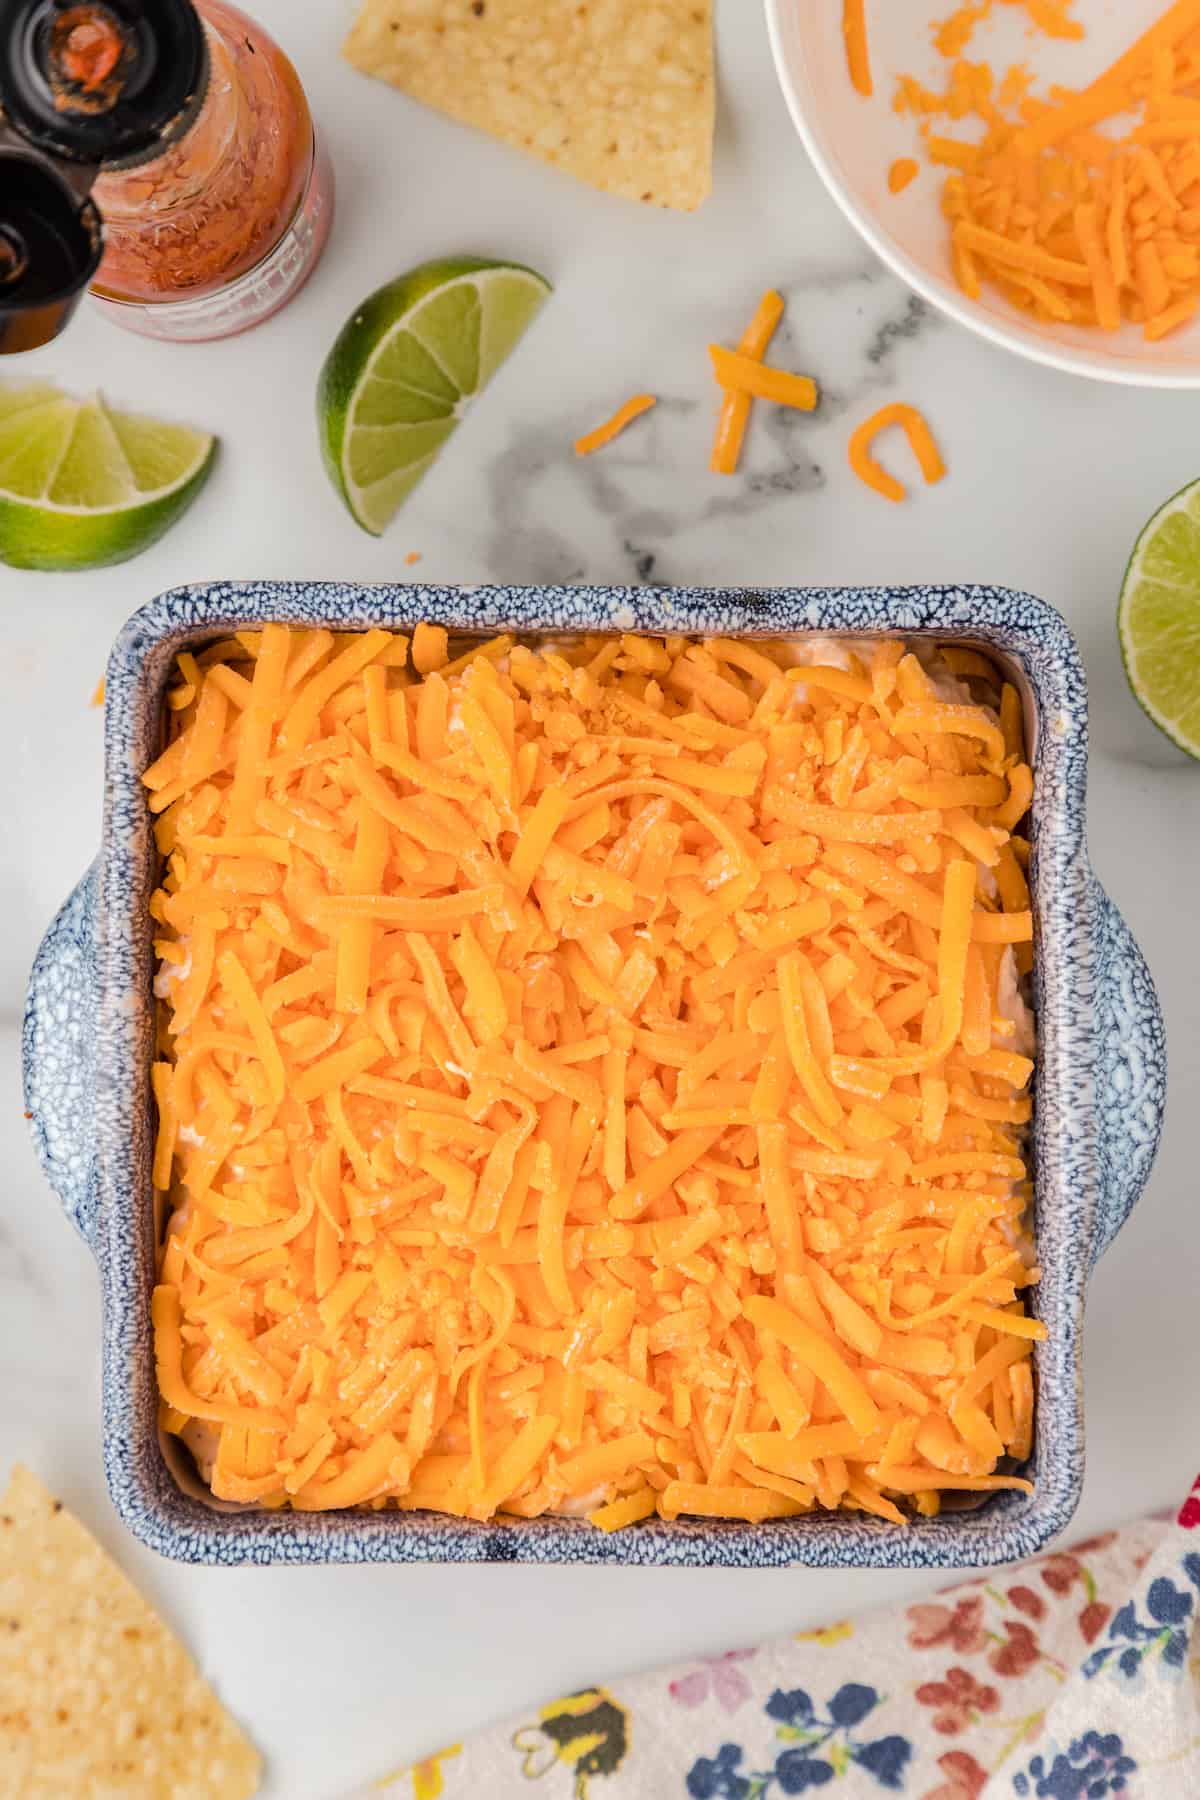 cover the dip with shredded cheddar cheese